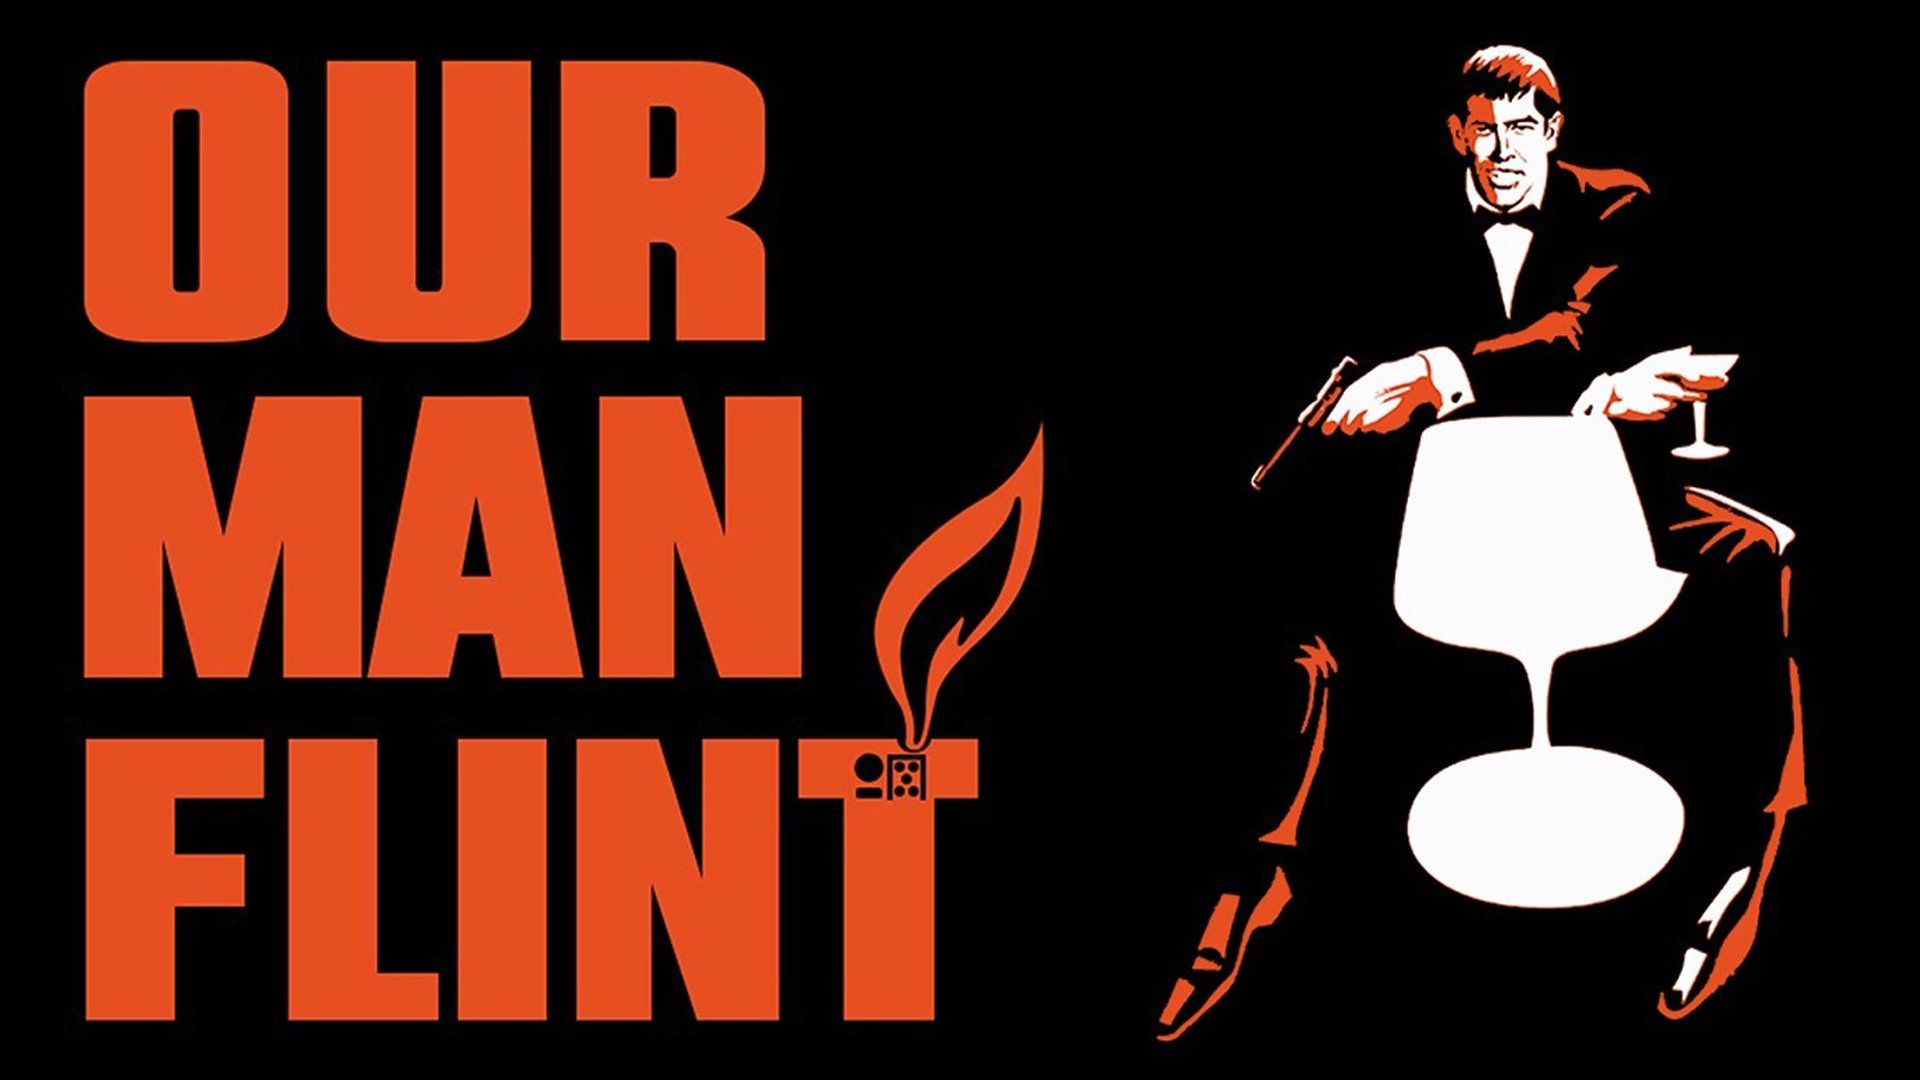 36-facts-about-the-movie-our-man-flint